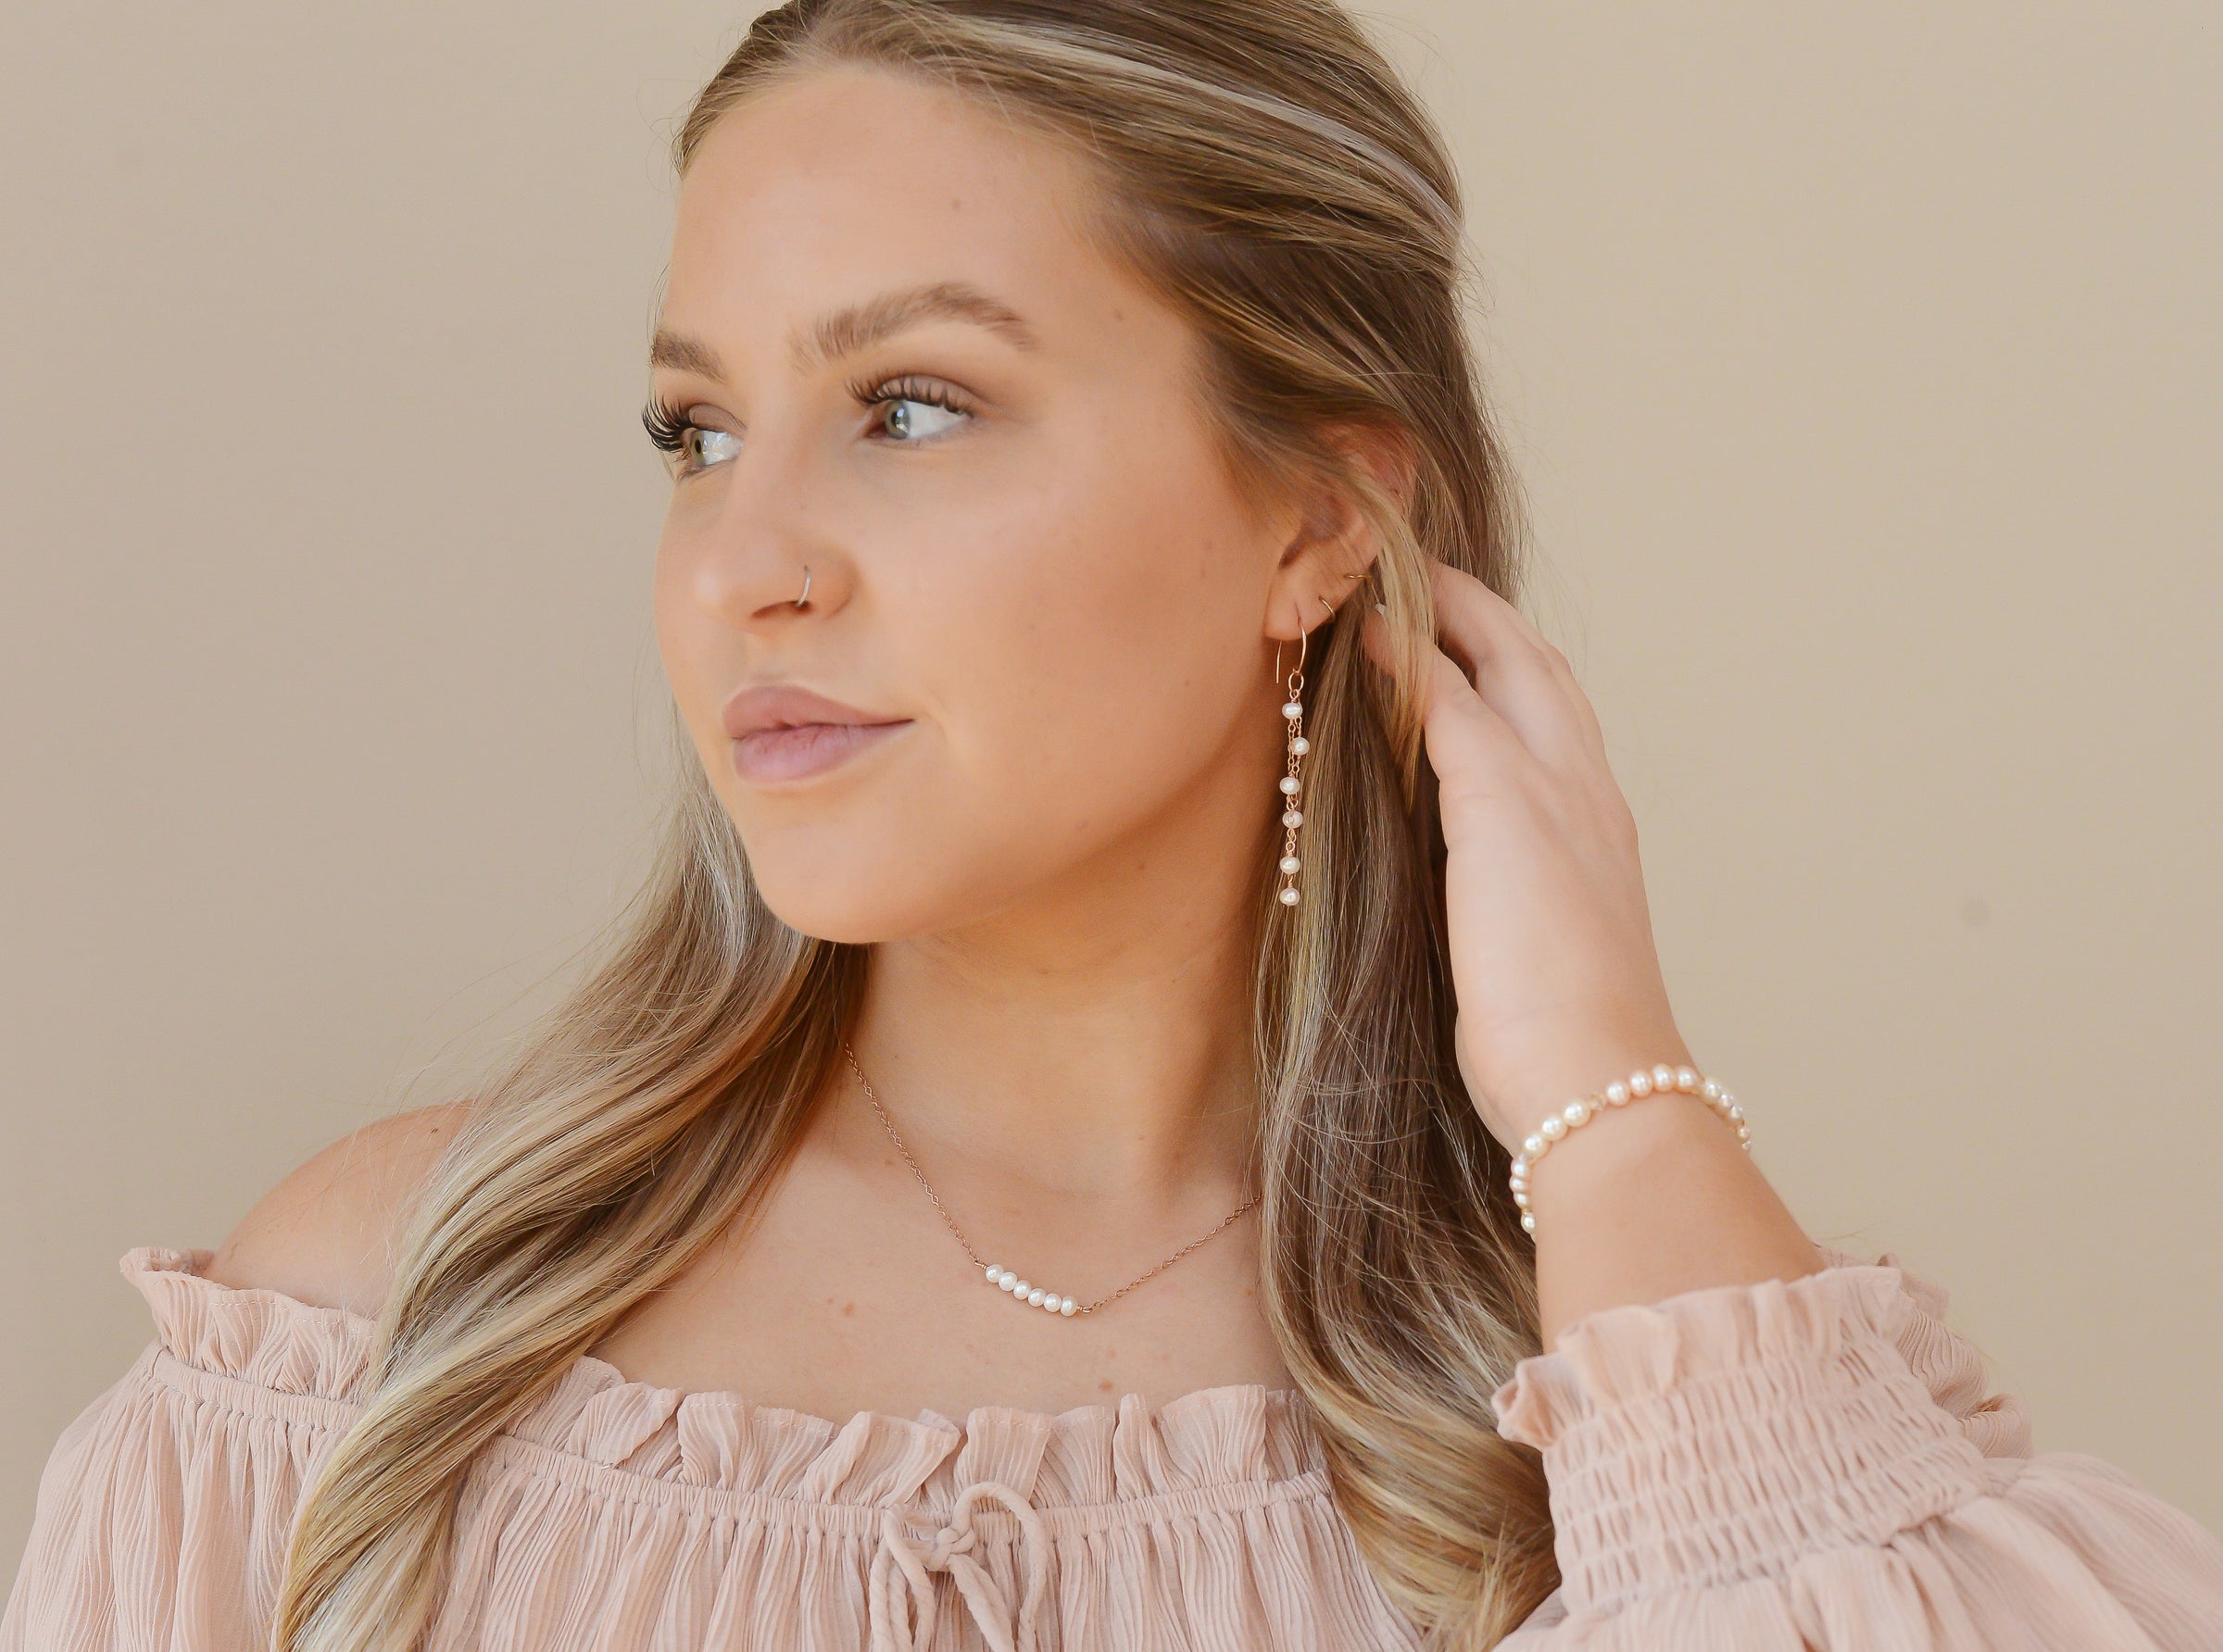 Jessica wearing 2-strand pearl earrings, pearl bar necklace and pearl bracelet. Rose Gold-filled metals and freshwater pearls.